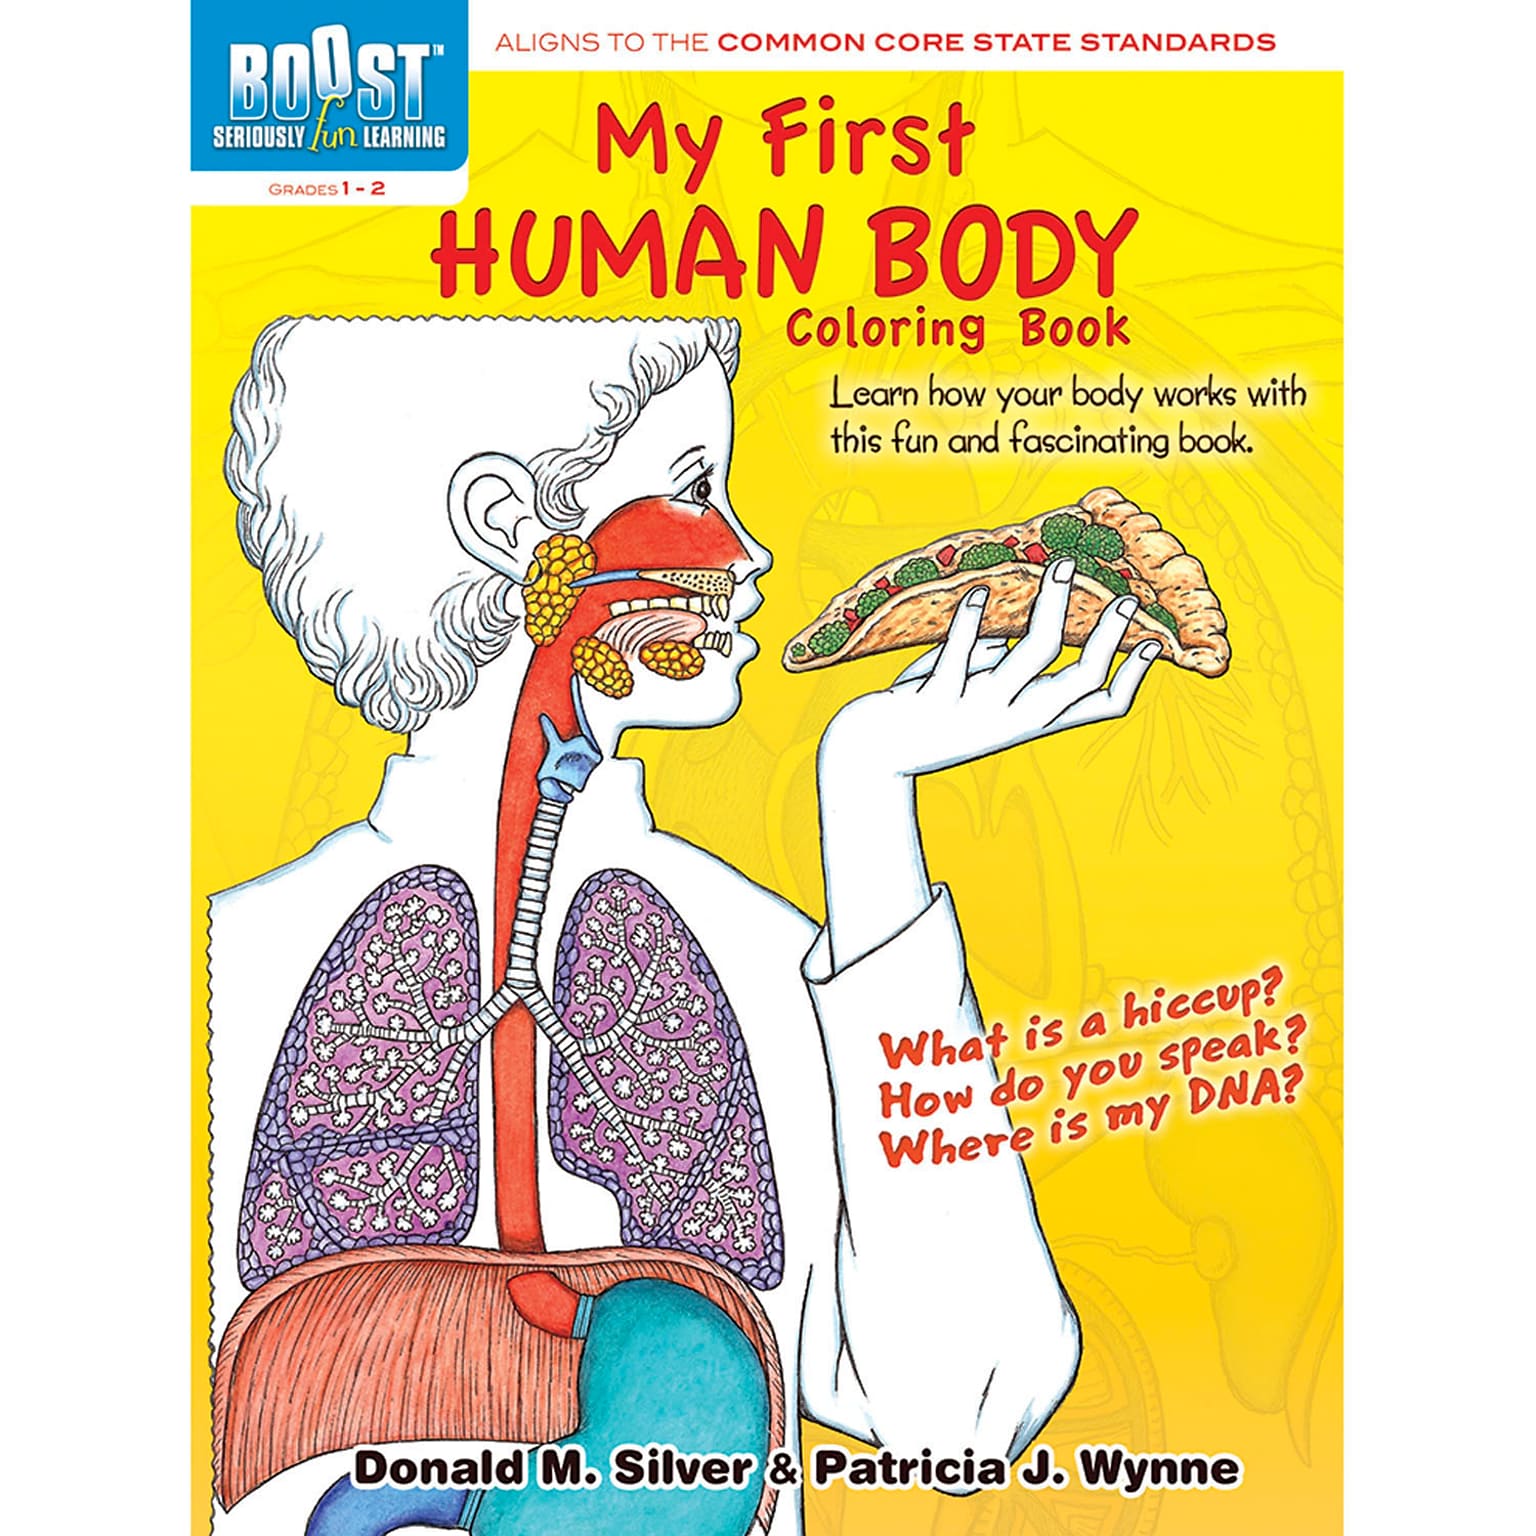 Dover® Boost™ My First Human Body Coloring Book